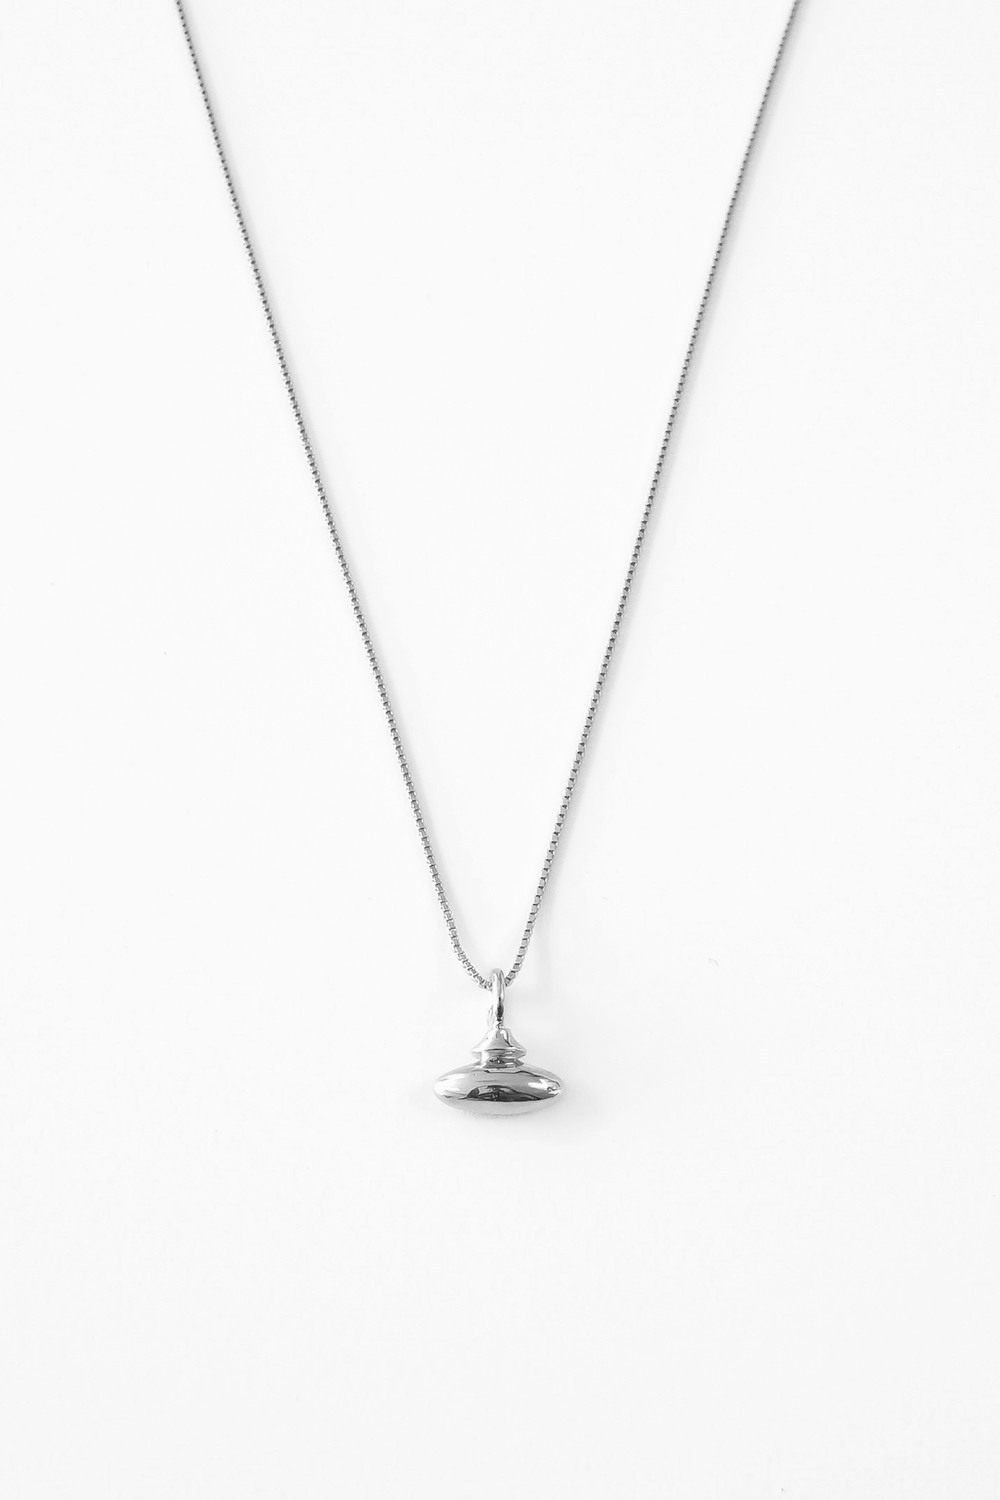 VS_ROUNDED CAP NECKLACE1